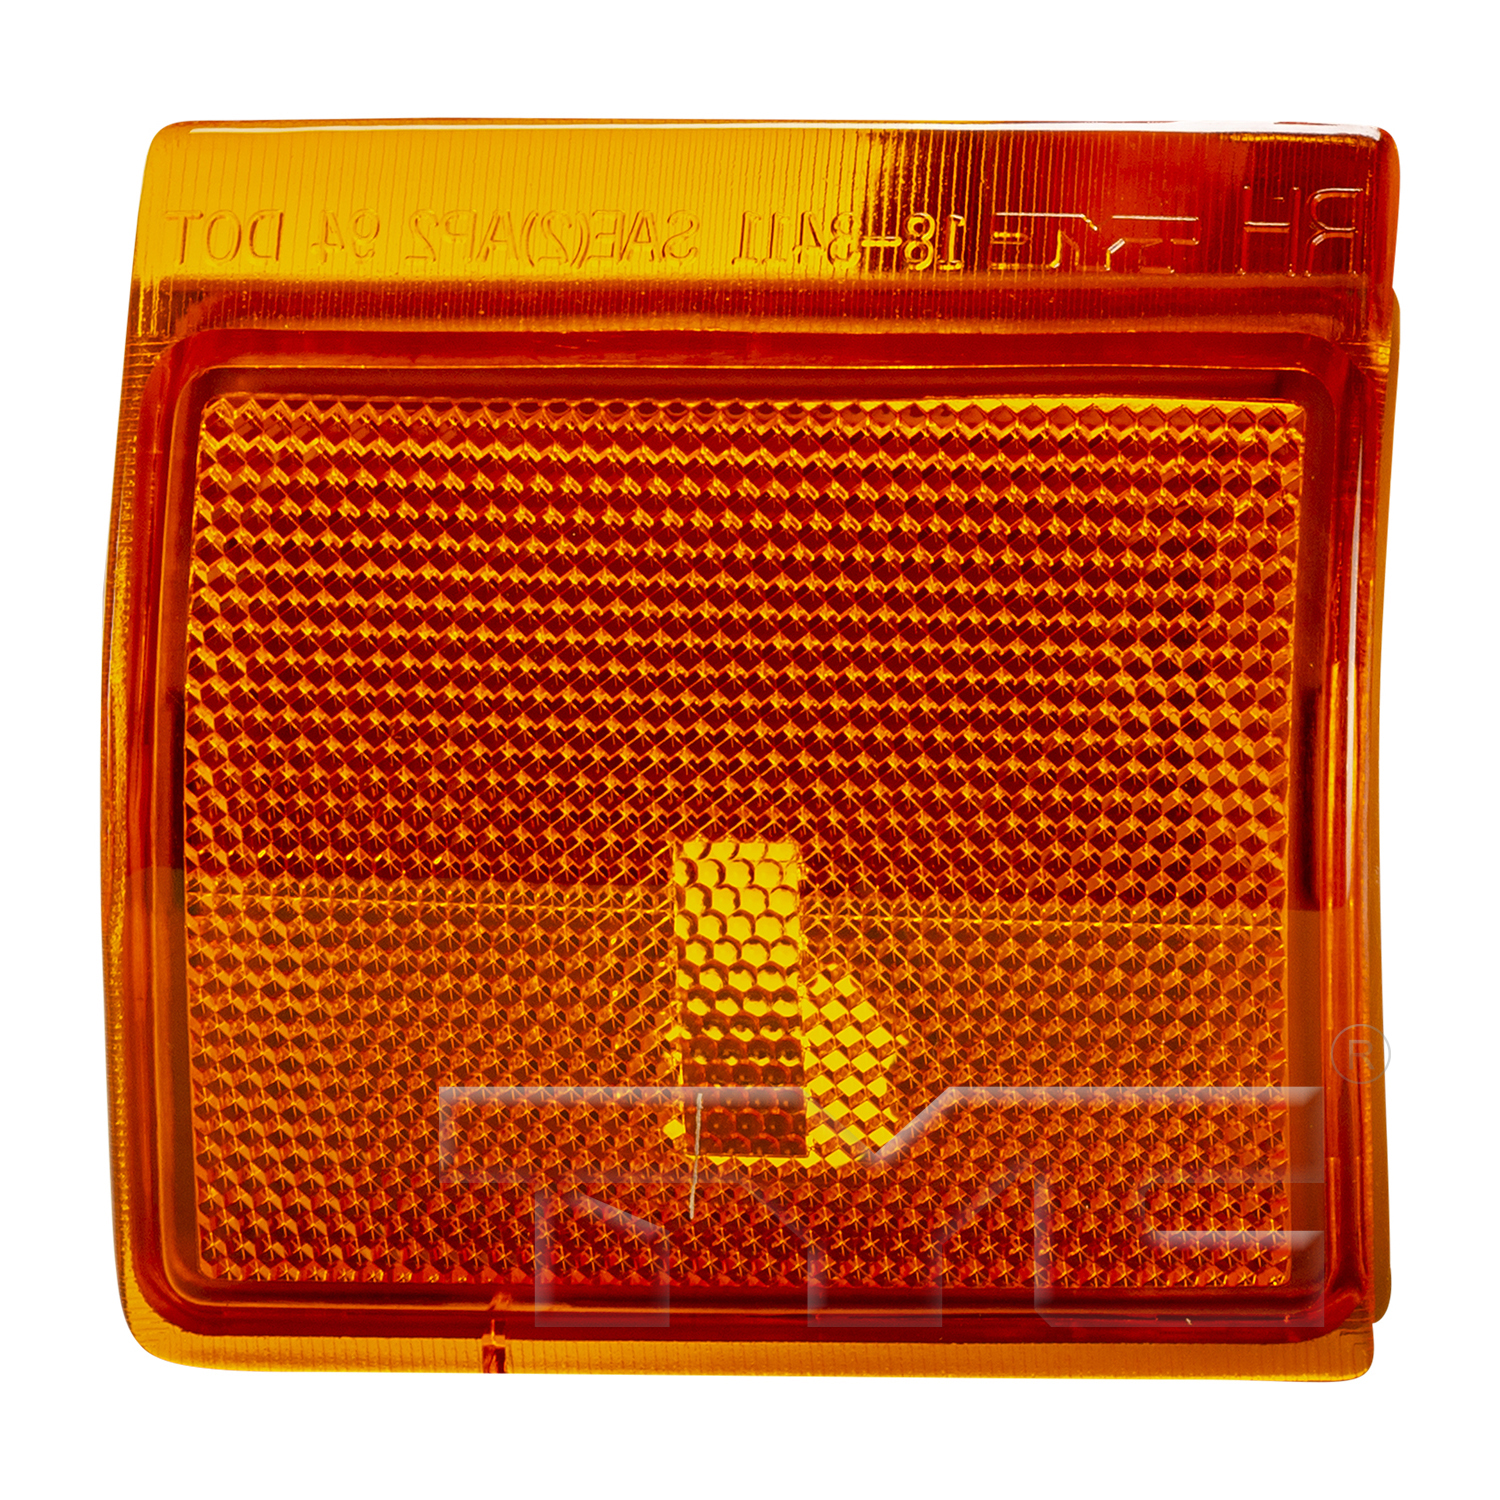 Aftermarket LAMPS for GMC - C1500 SUBURBAN, C1500 SUBURBAN,94-99,LT Front marker lamp assy